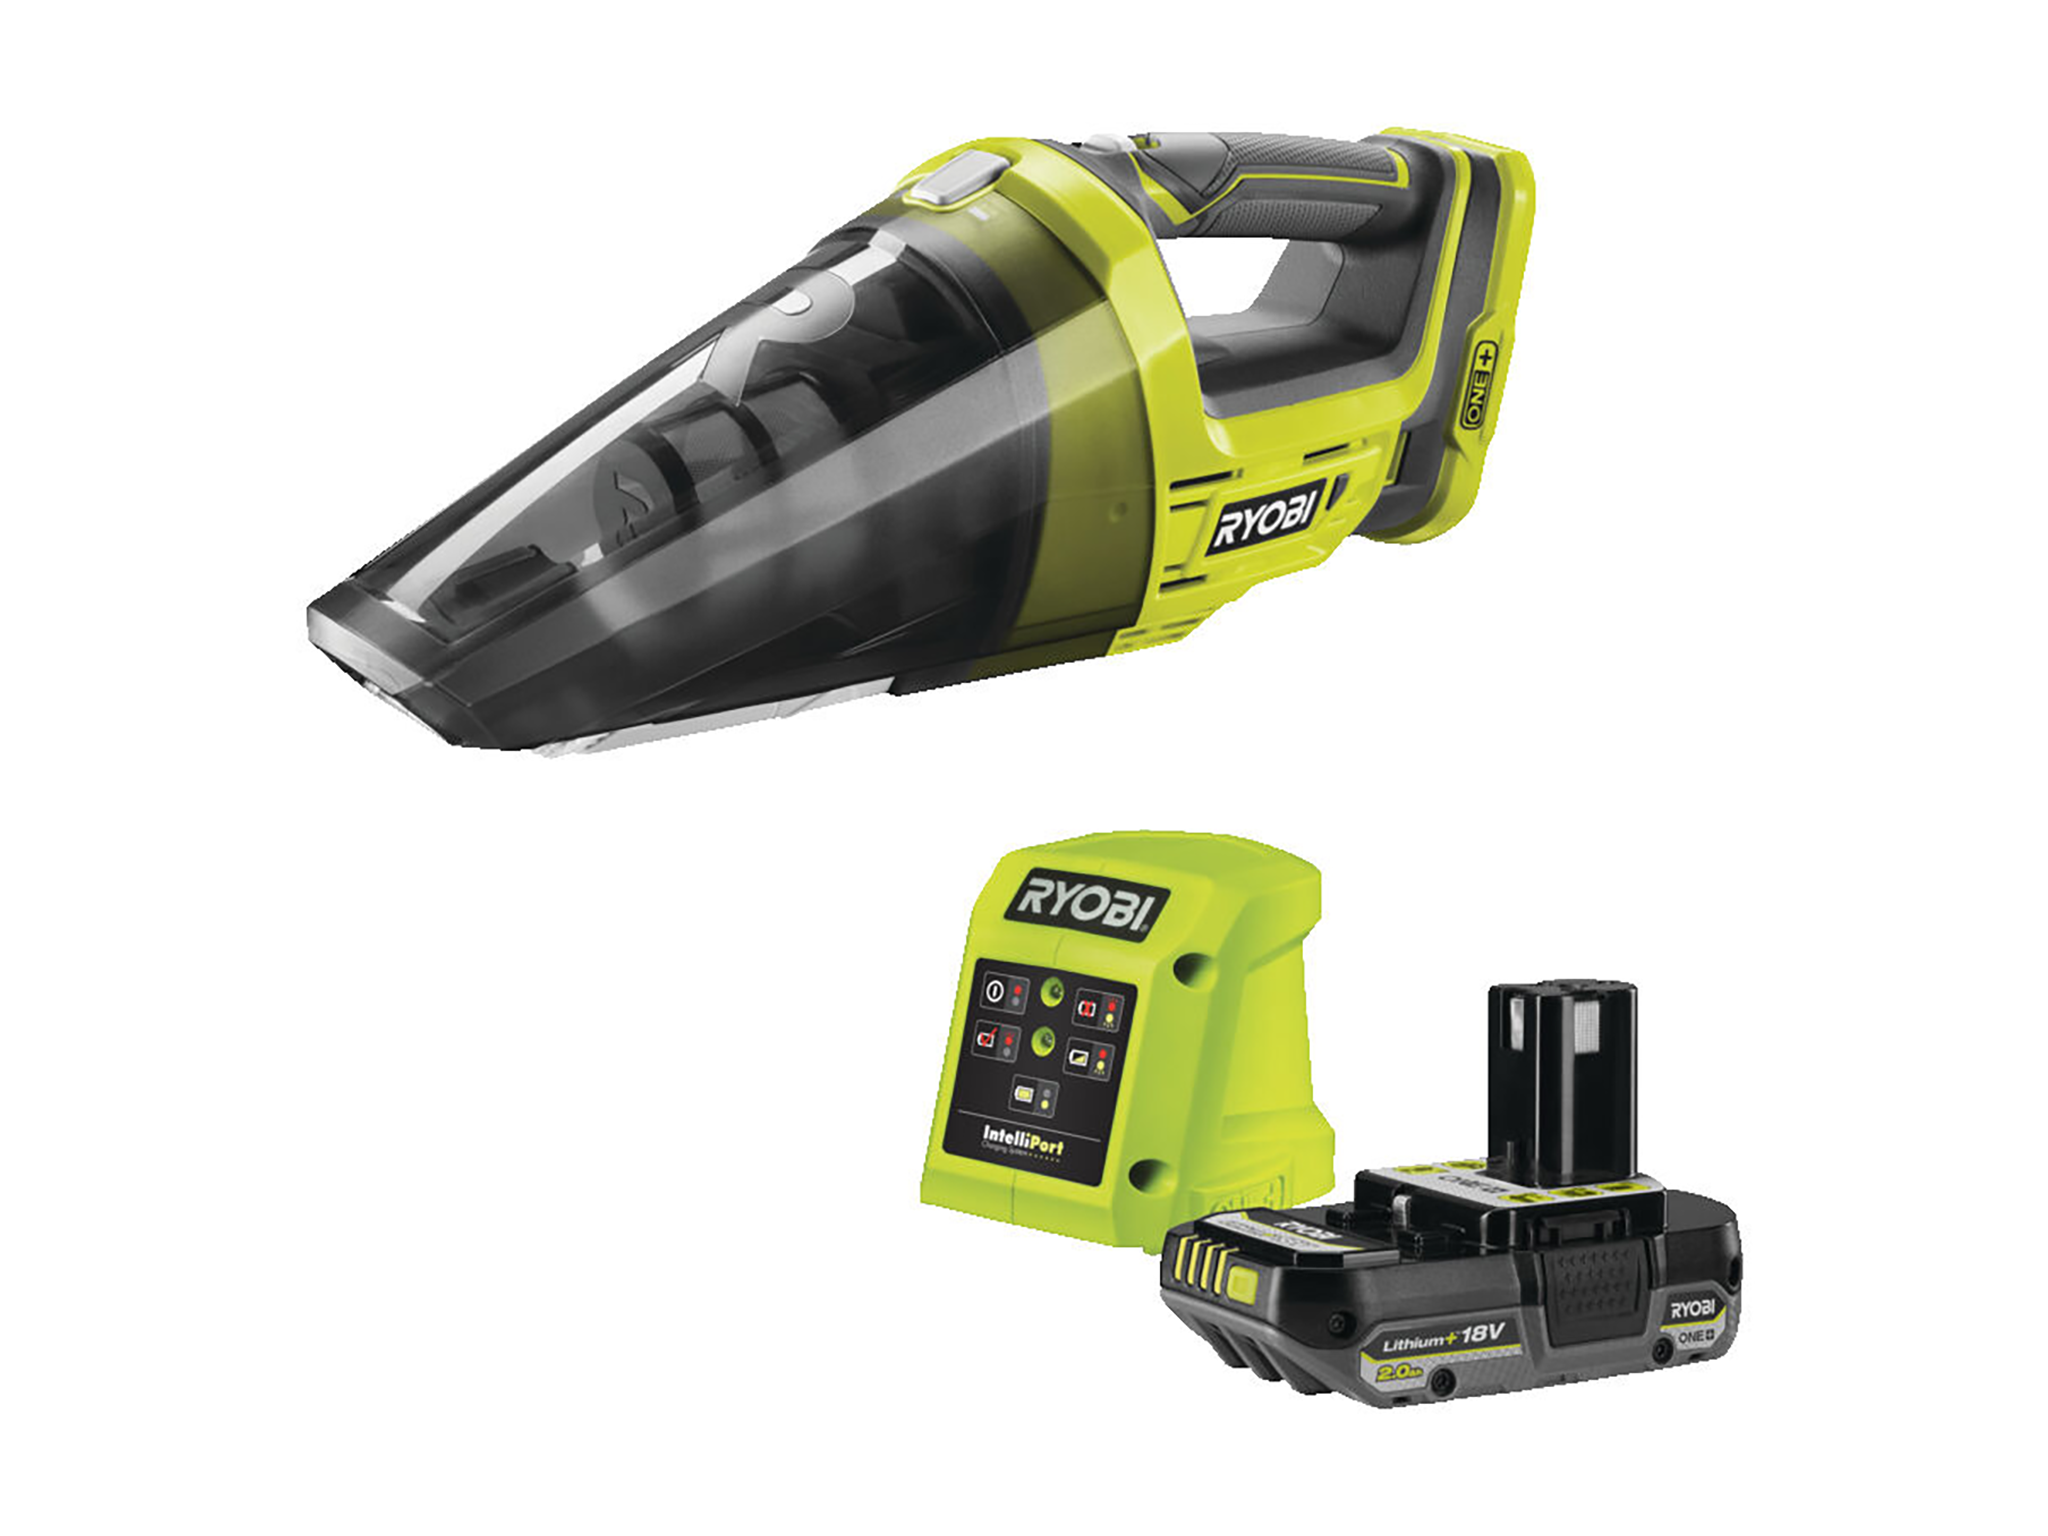 Ryobi is Launching 3 More Cordless Vacuums in 2023